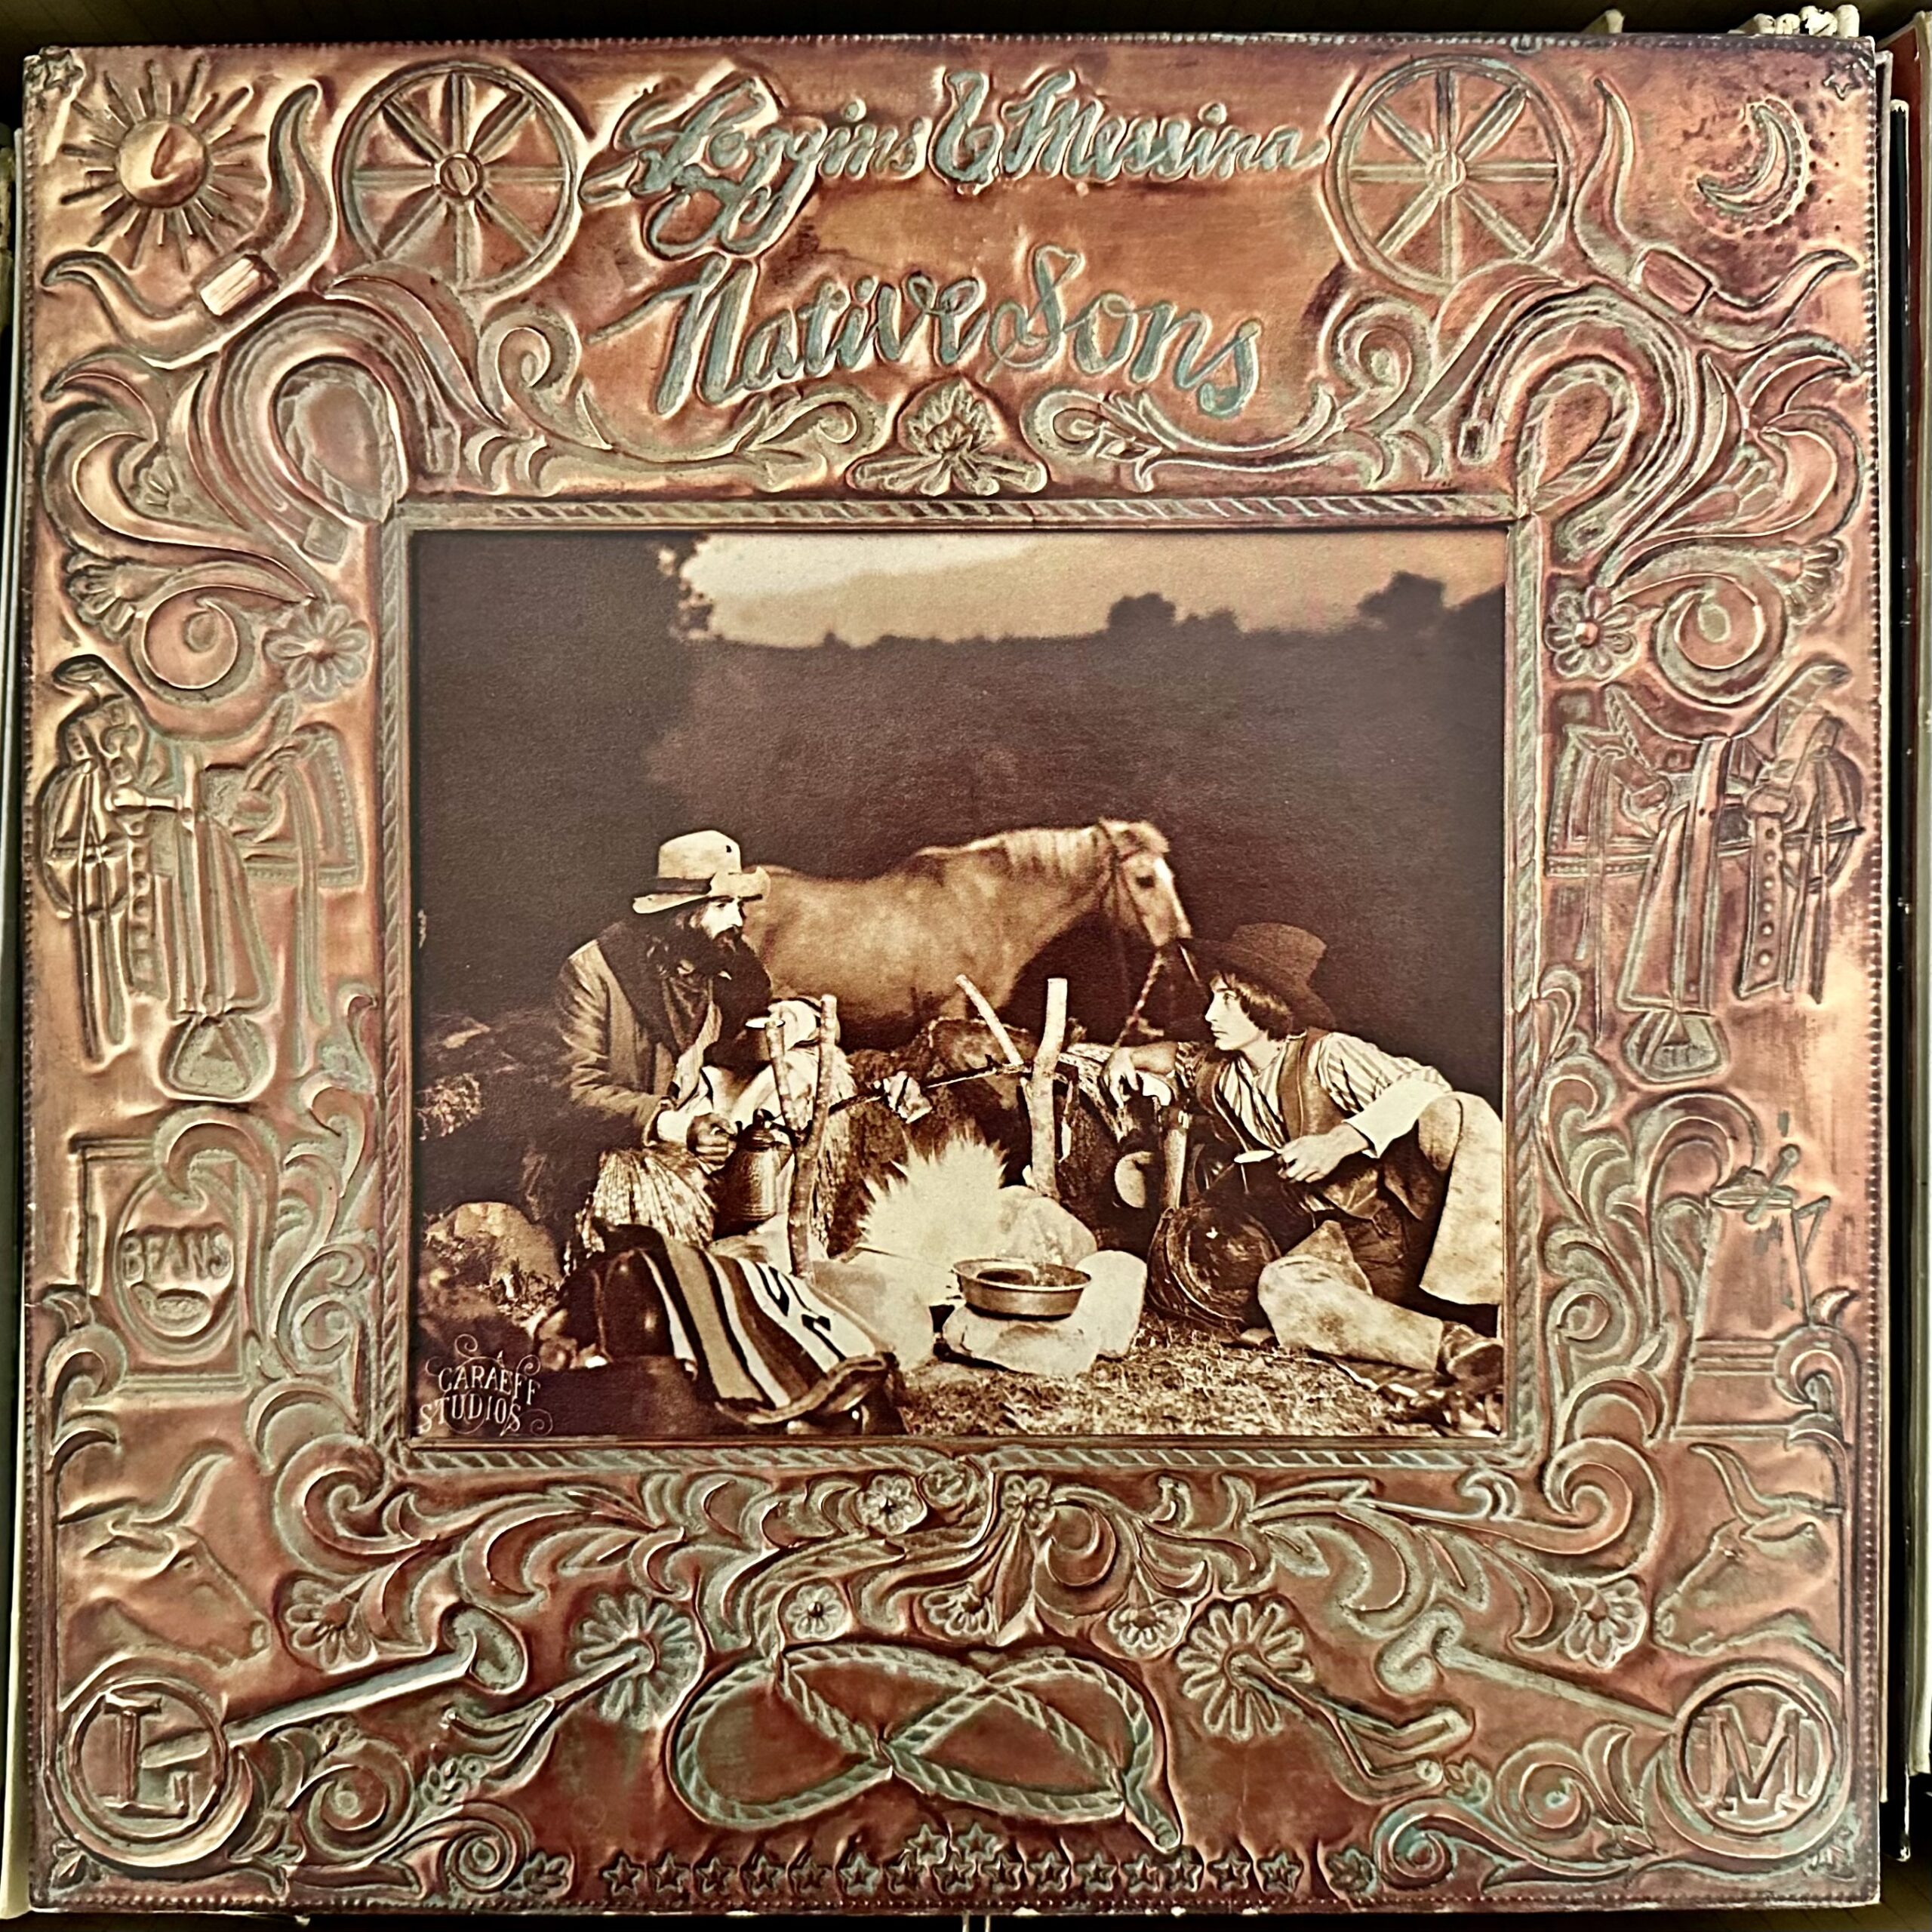 Native Sons by Loggins and Messina